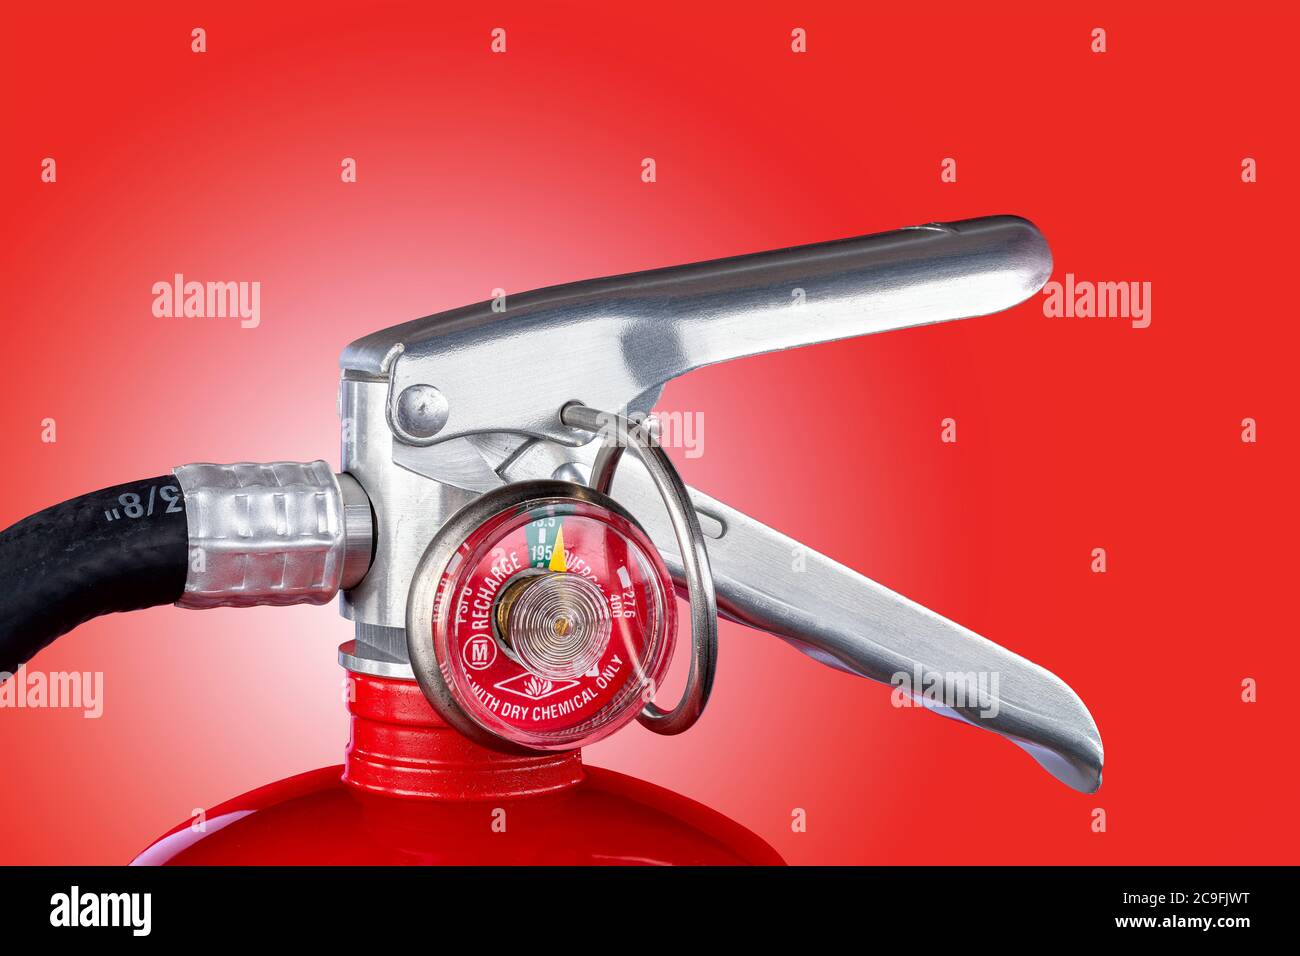 A classic red fire extinguisher valve on a red gradient background for use as a design element or safety inference for home and business protection. Stock Photo